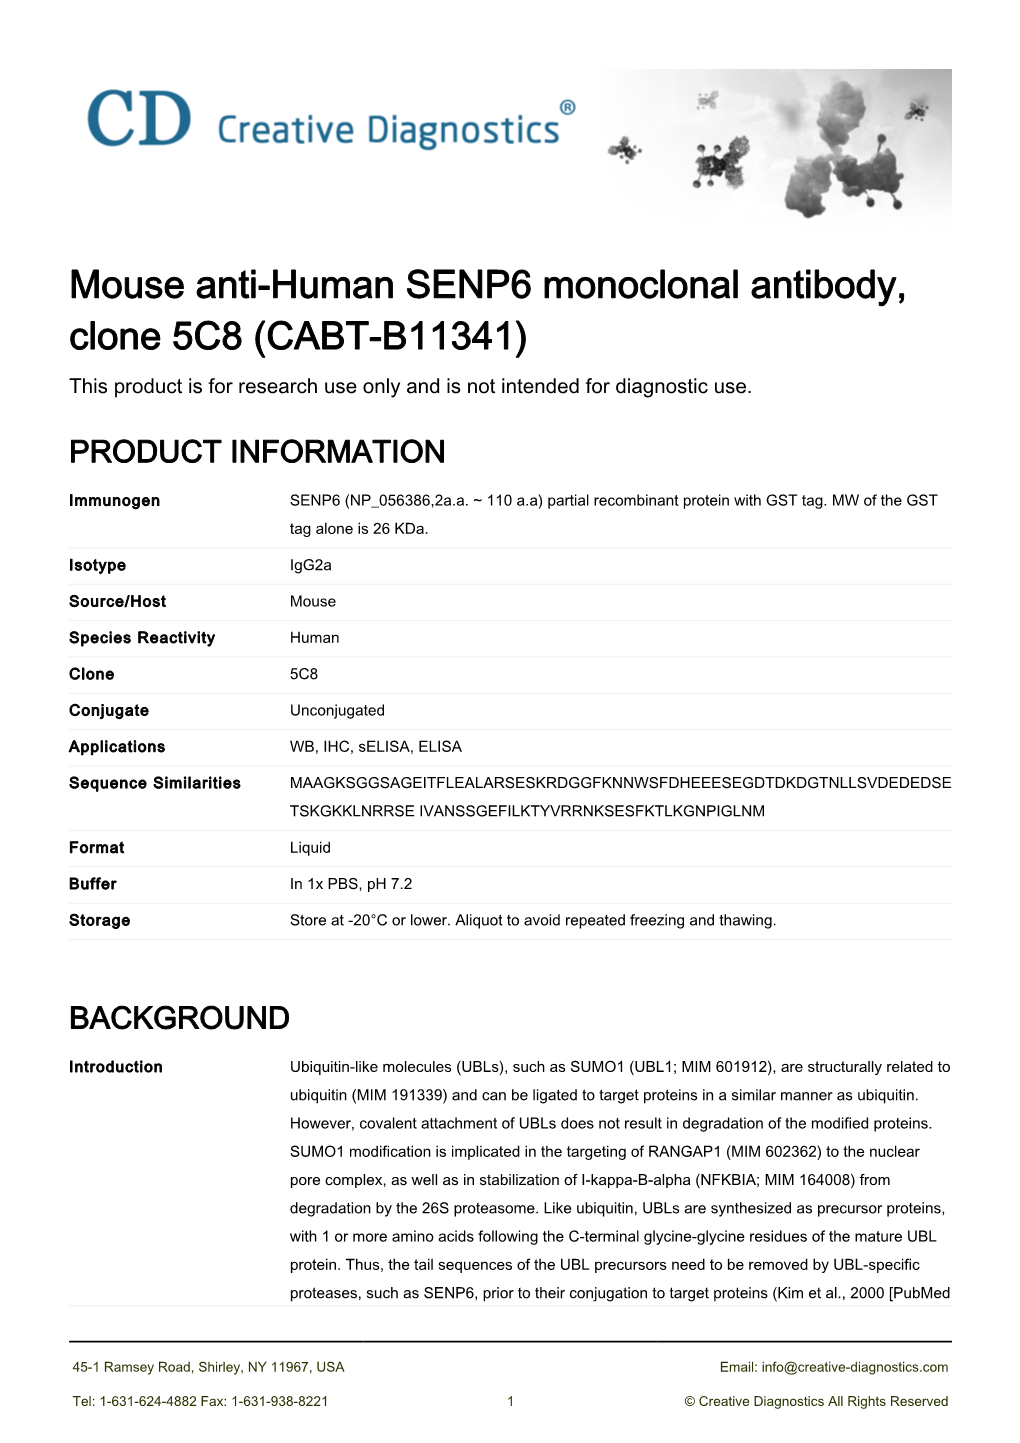 Mouse Anti-Human SENP6 Monoclonal Antibody, Clone 5C8 (CABT-B11341) This Product Is for Research Use Only and Is Not Intended for Diagnostic Use